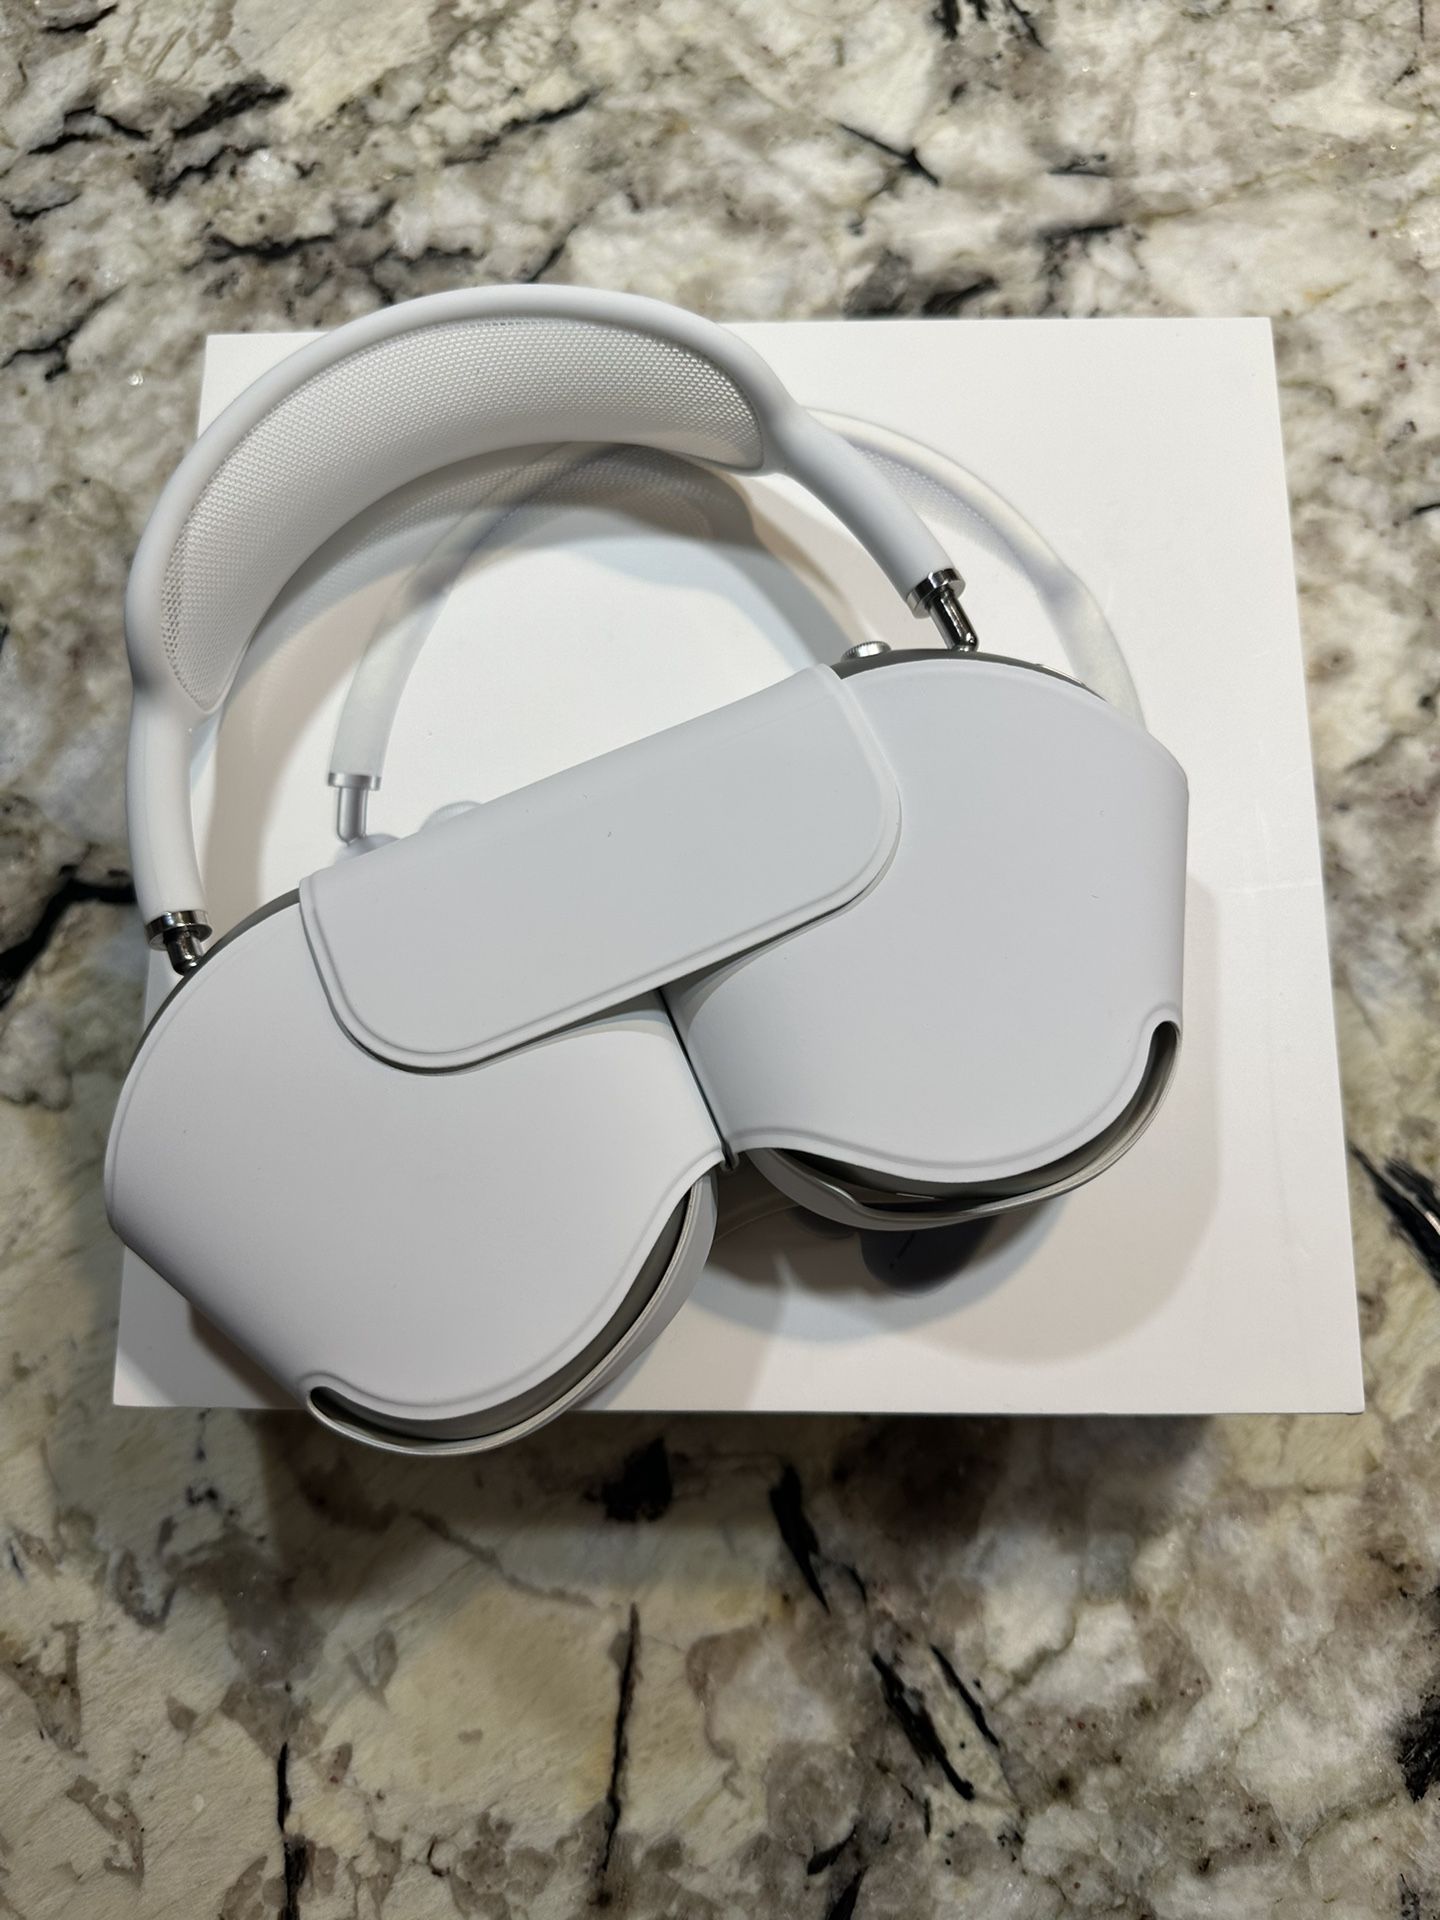 Apple Airpods Max -  Silver (ONLY SHIPPING - TAKING OFFERS)